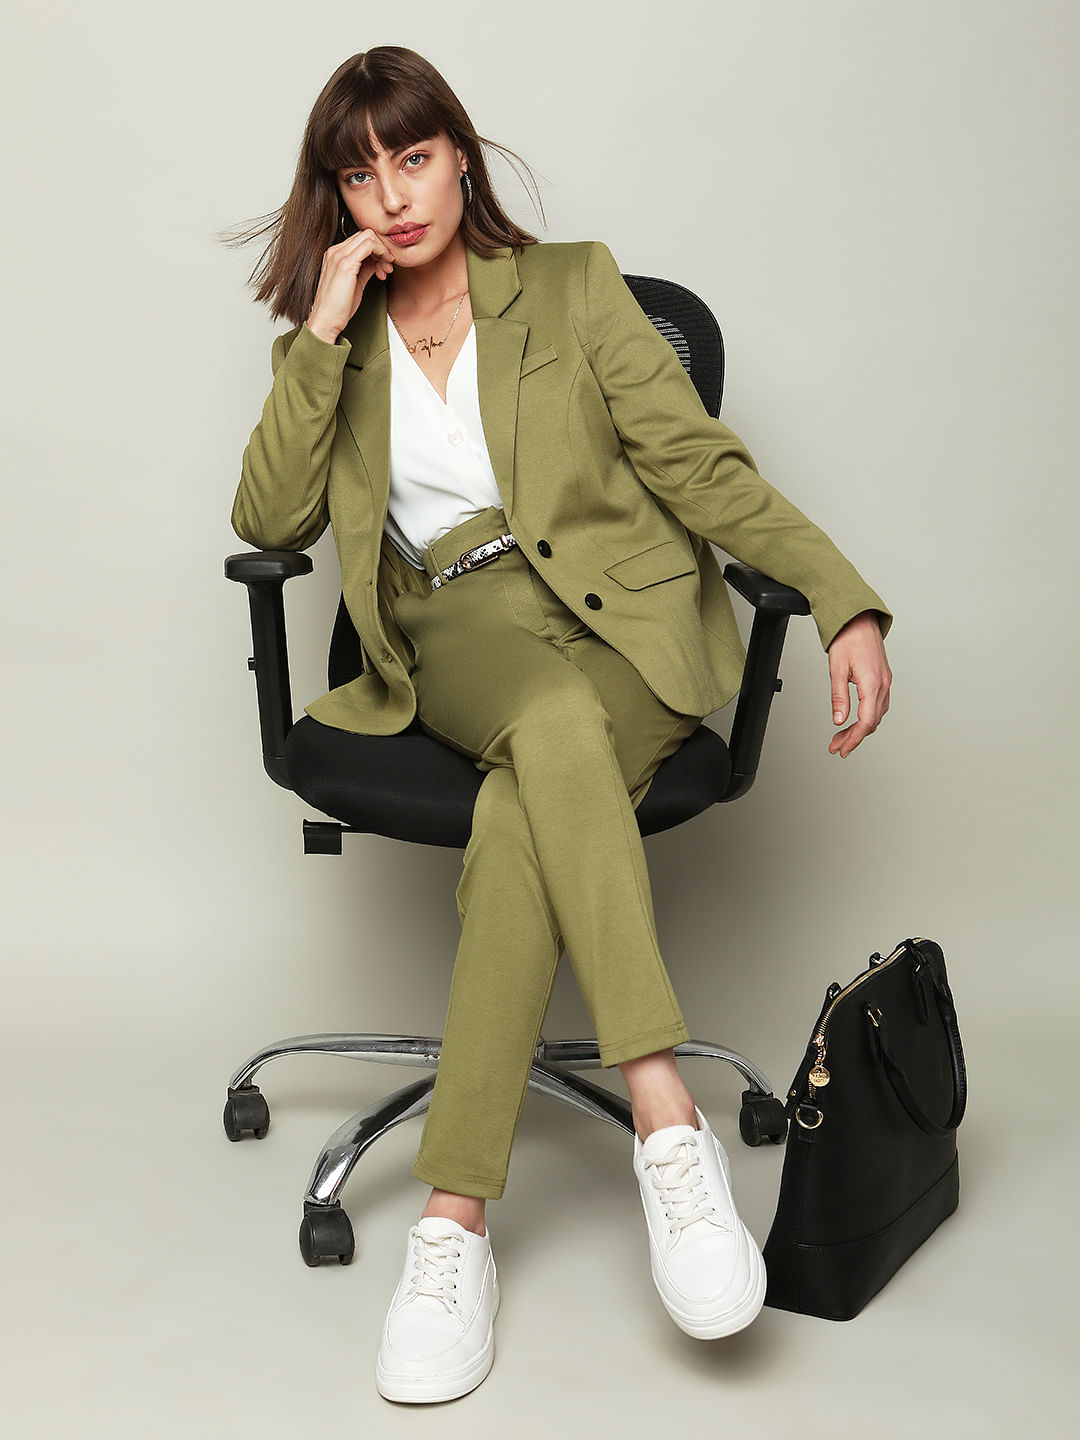 Trouser Suit Special Occasion Suits  Suit Separates for Women with 2  Pieces for sale  eBay